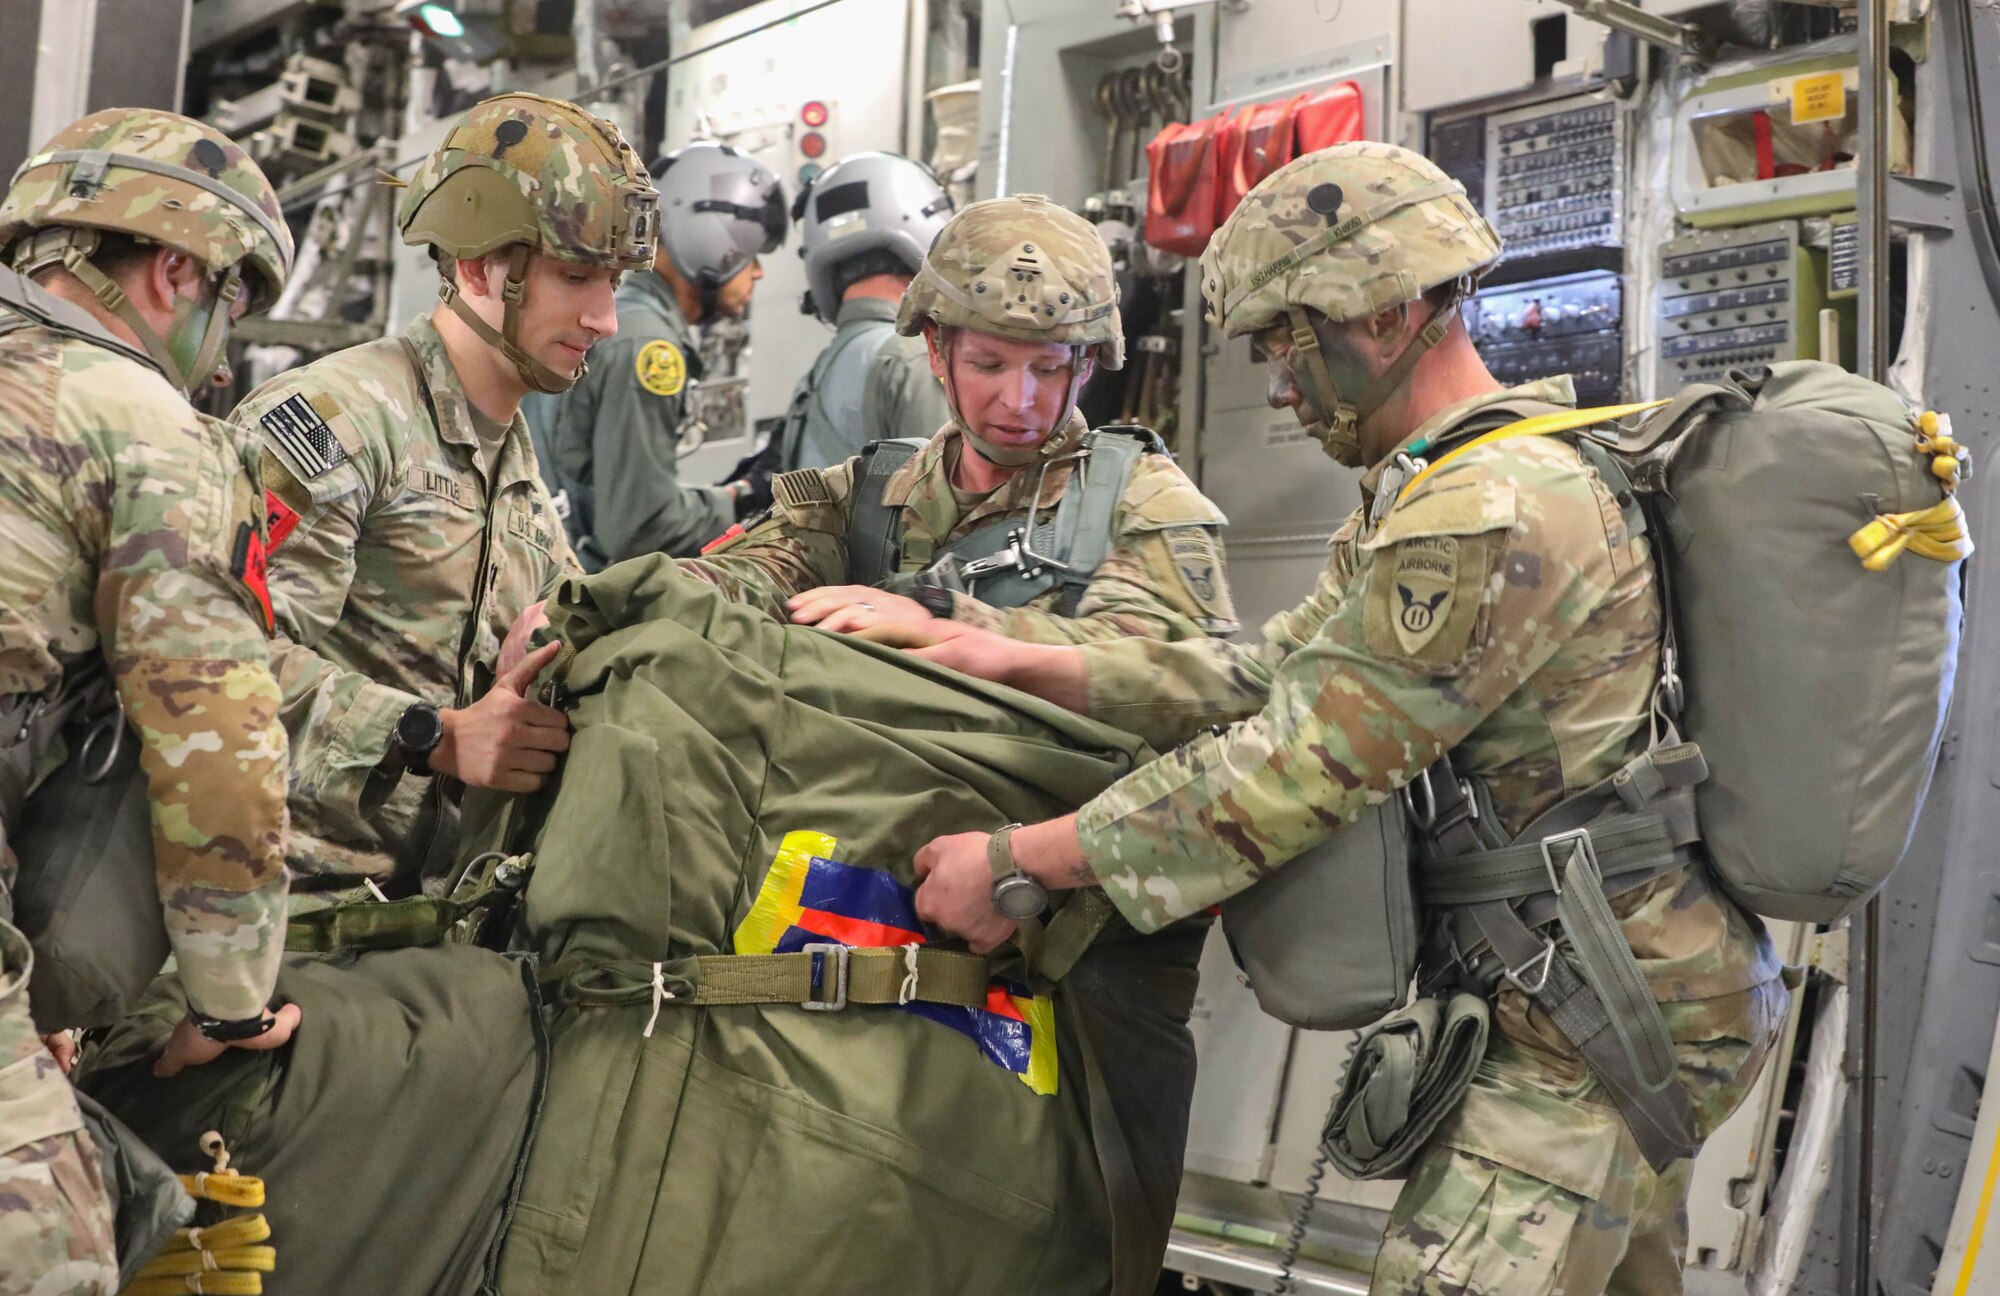 Soldiers pack supplies into a bag on an aircraft.